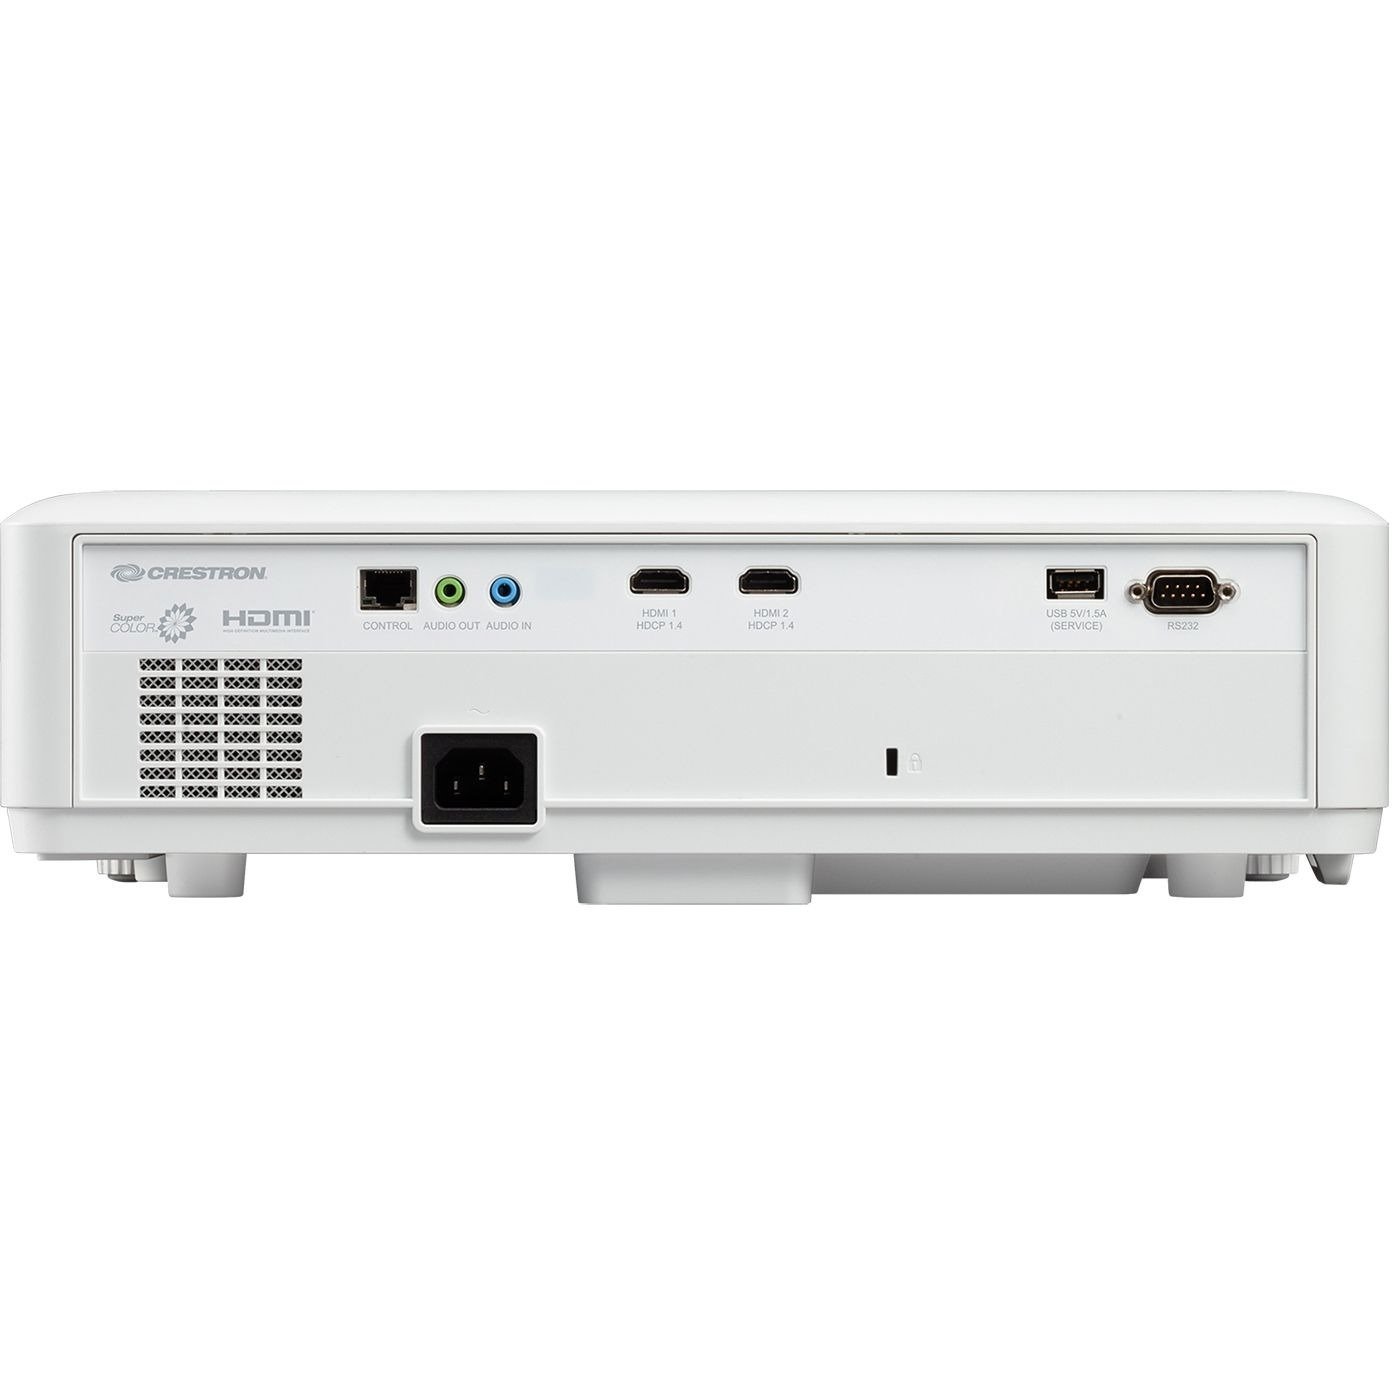 ViewSonic LS610WH 4000 Lumens WXGA LED Projector with H/V Keystone, 4 Corner Adjustment and LAN Control for Home and Office